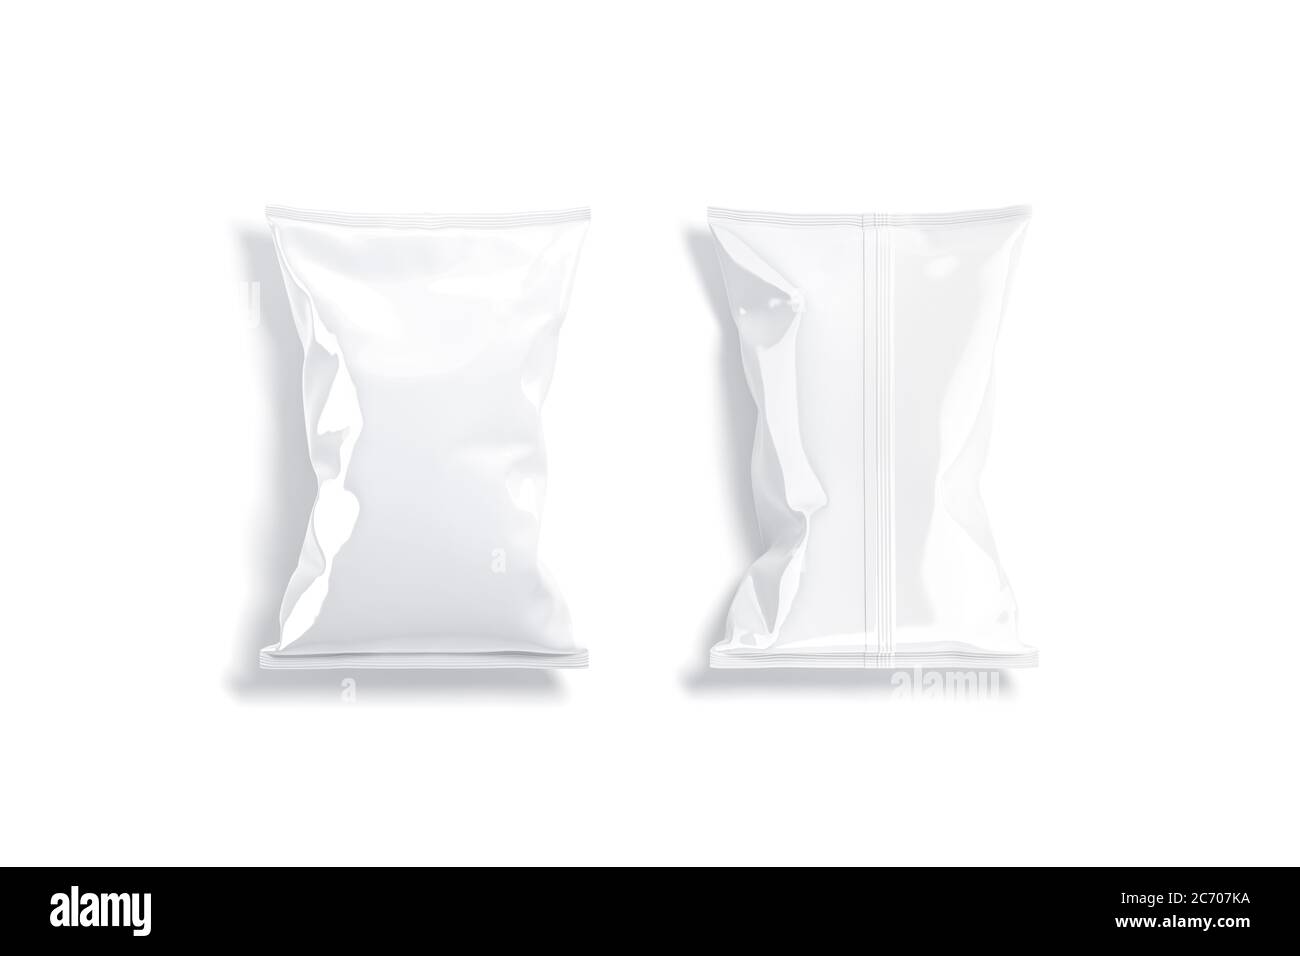 Blank white foil big chips pack mock up, top view Stock Photo